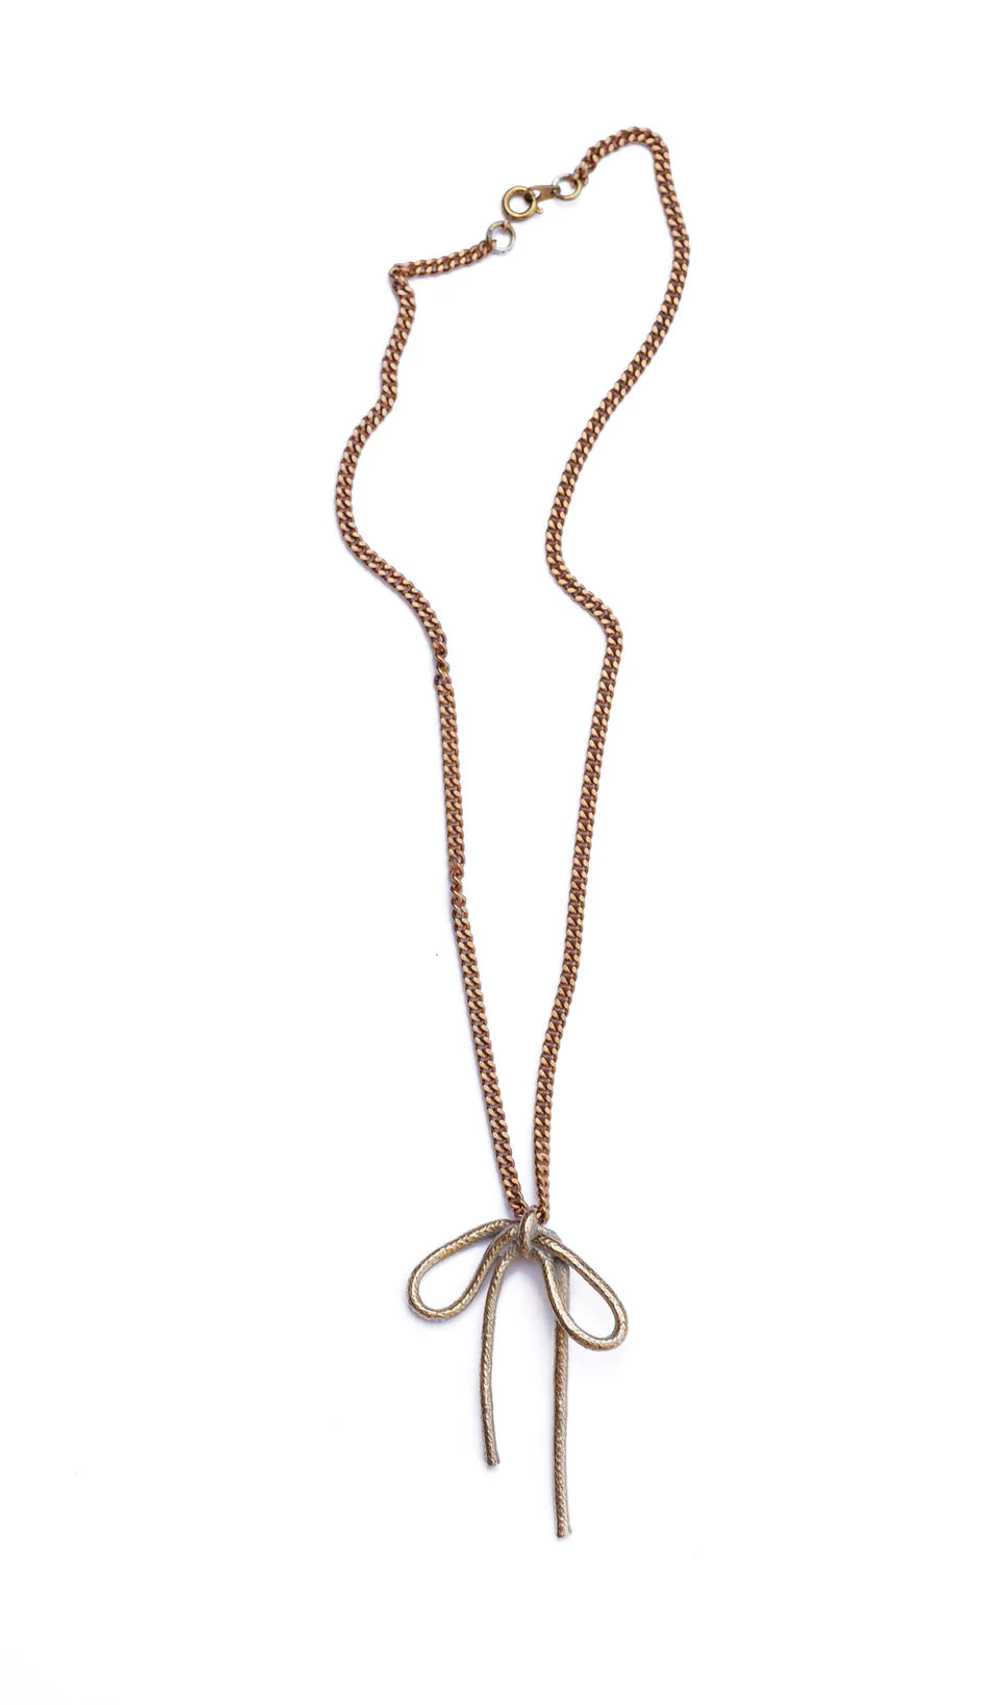 Watersandstone Little Bow Necklace - image 1